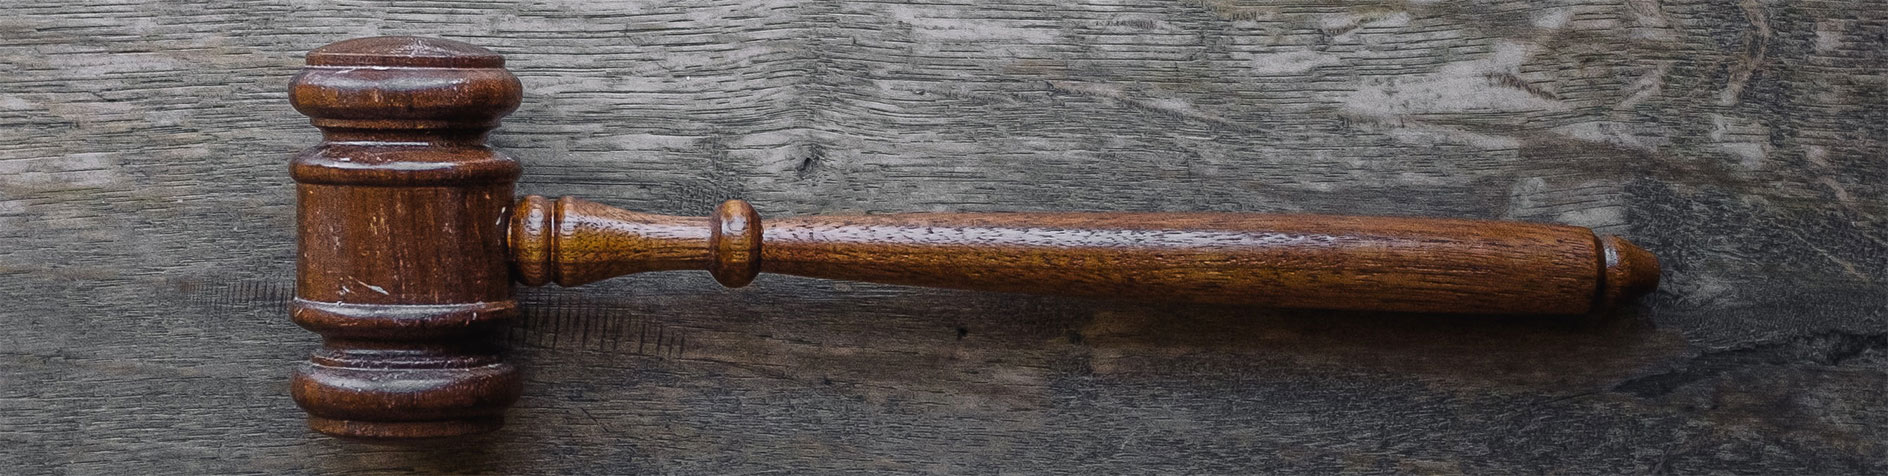 Wooden gavel lies on a table